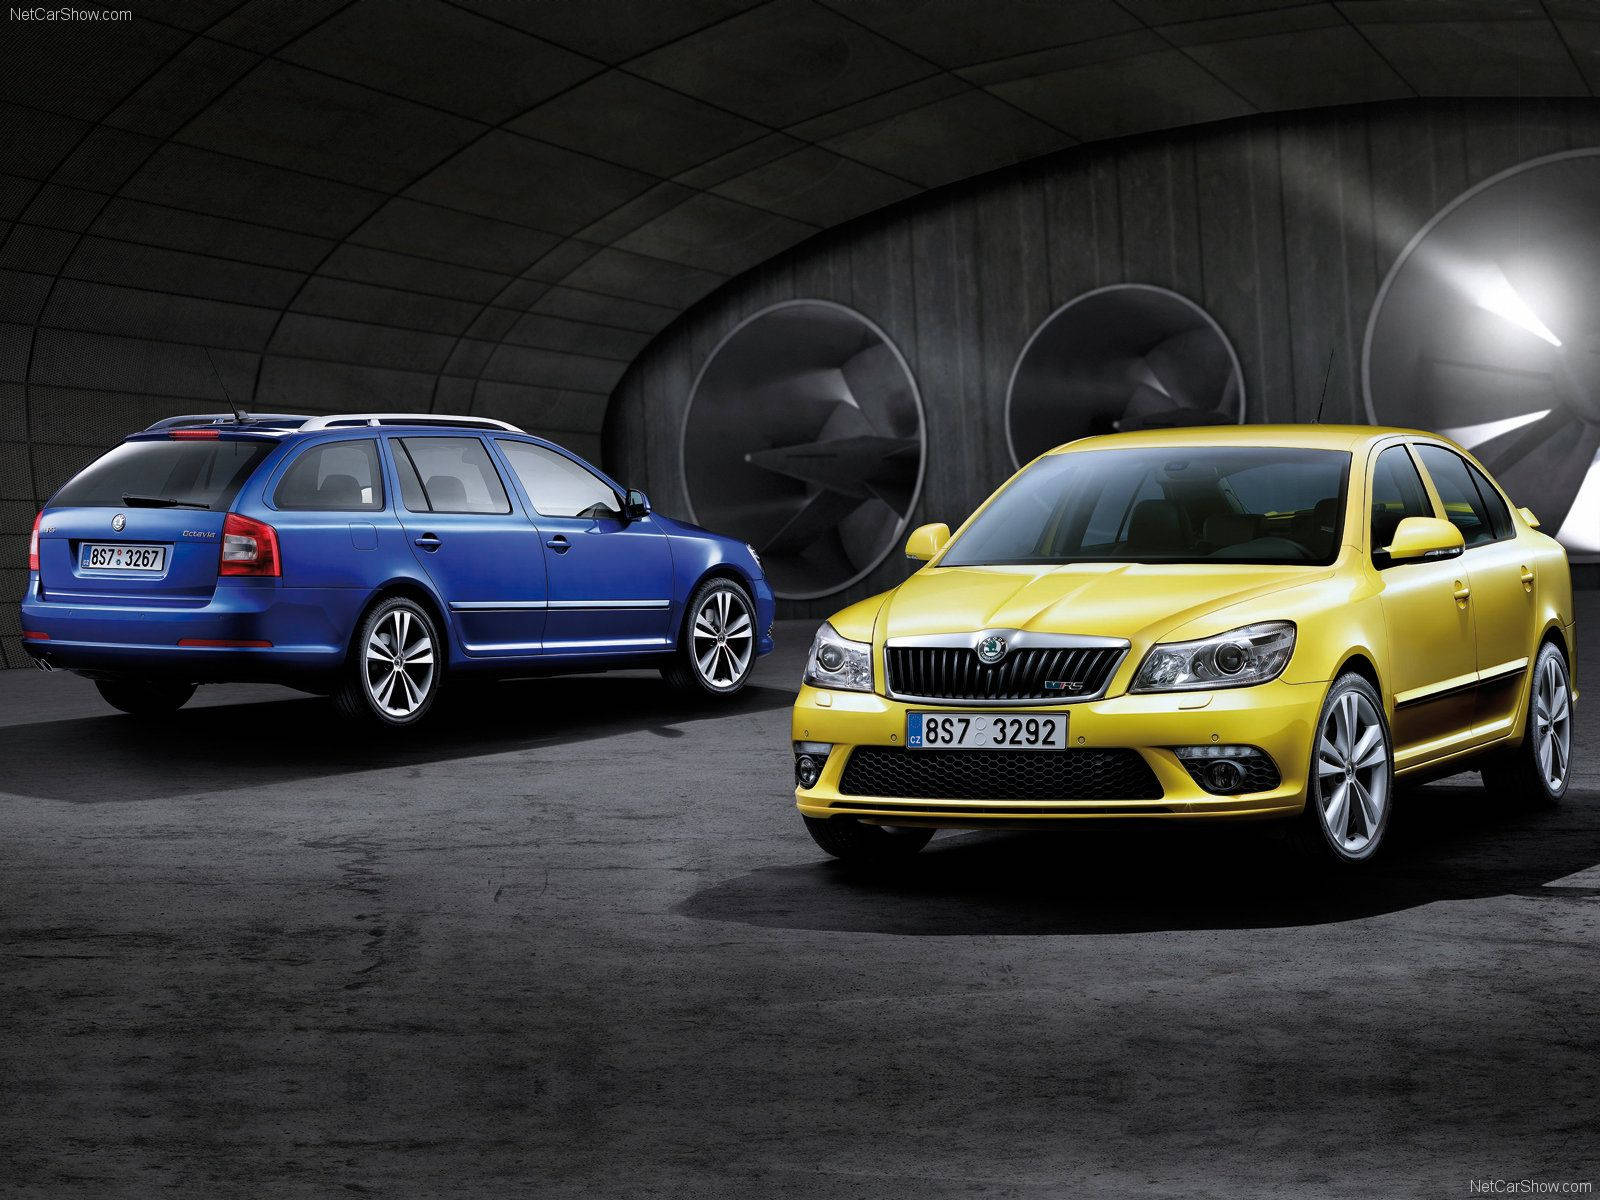 The Exciting Skoda Octavia Rs Wallpaper